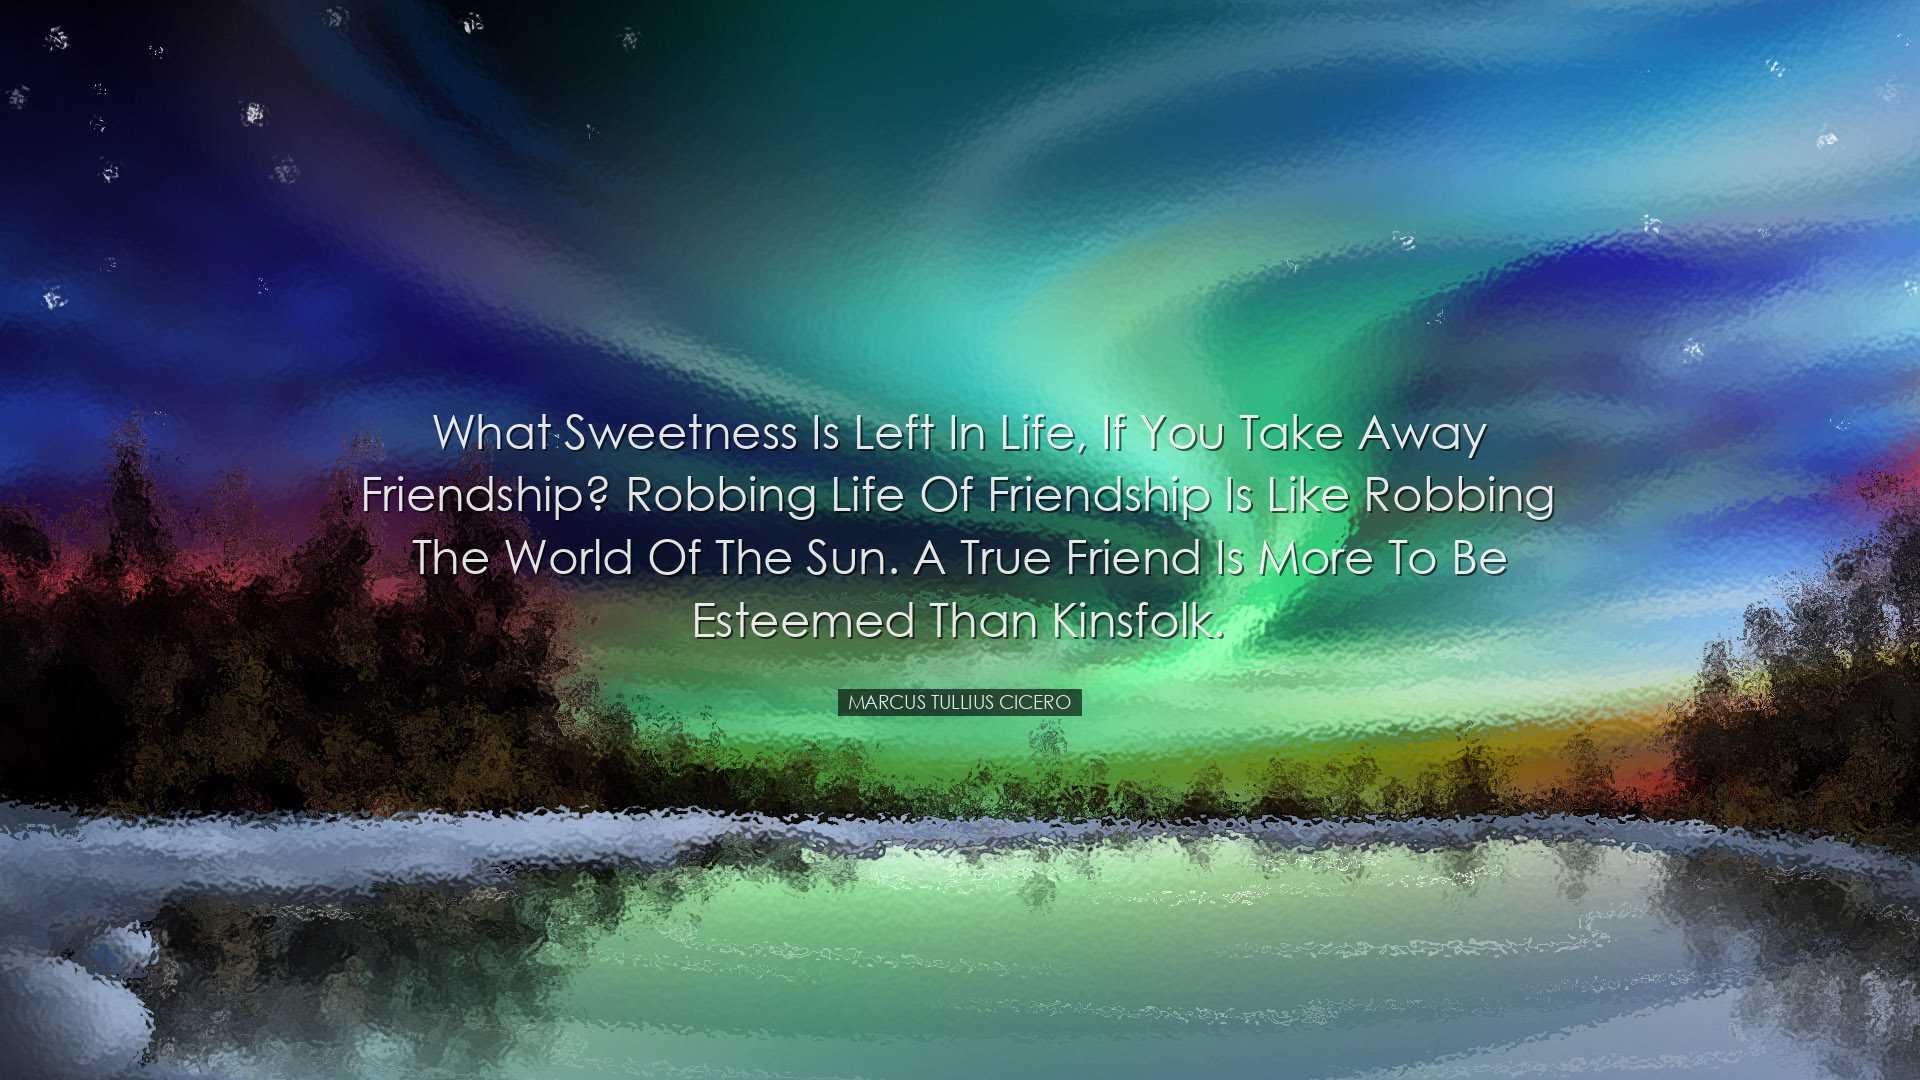 What sweetness is left in life, if you take away friendship? Robbi